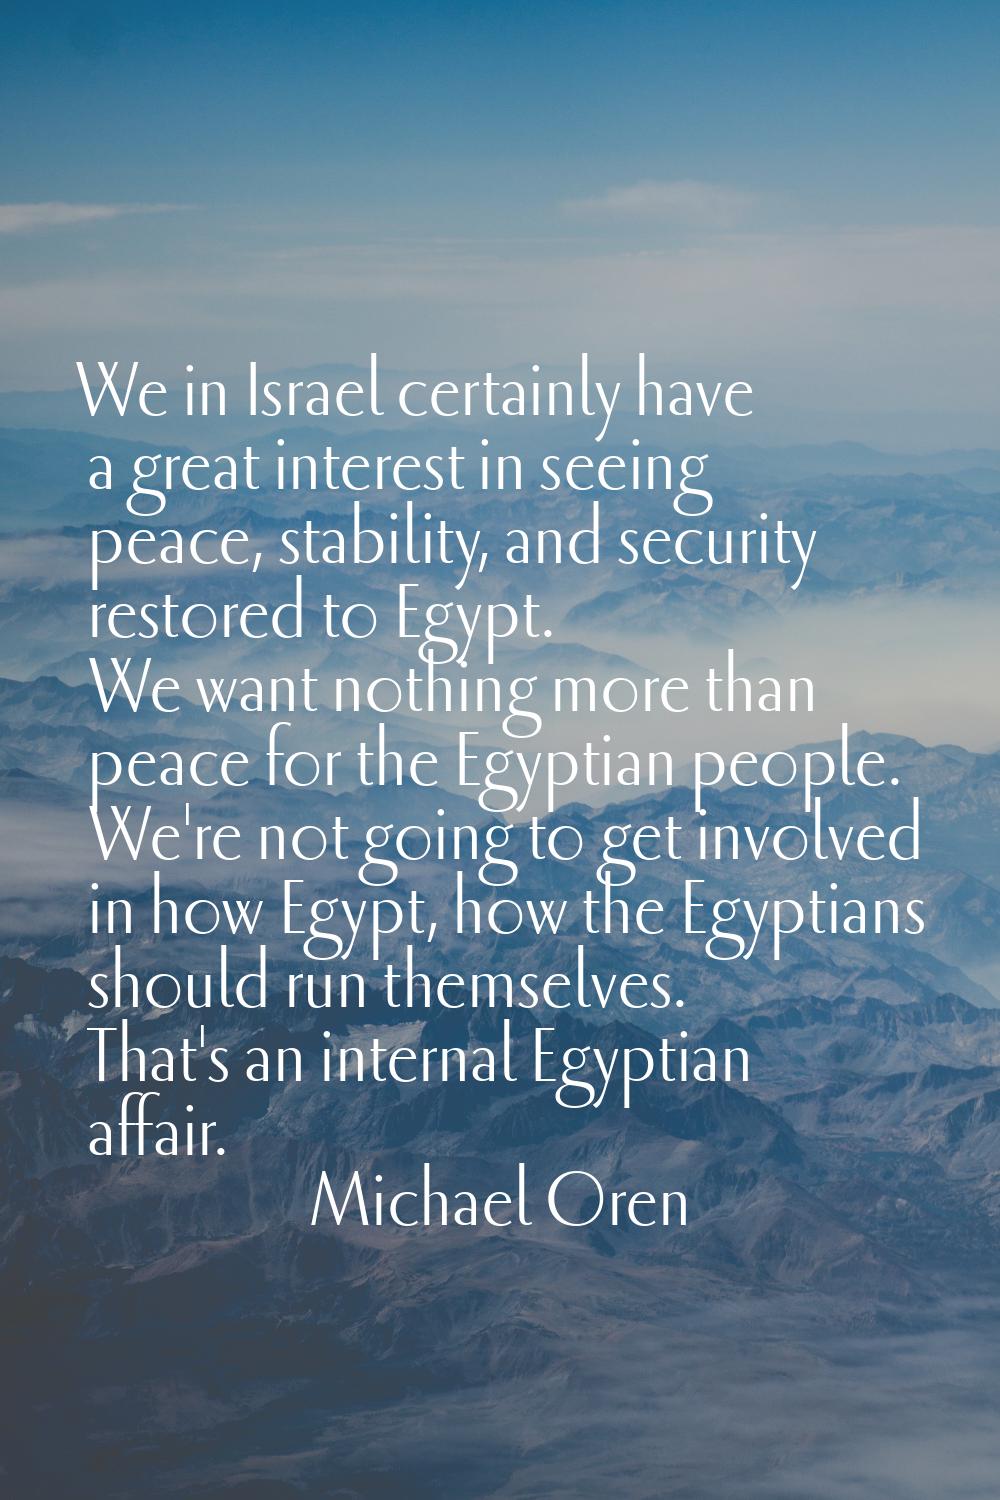 We in Israel certainly have a great interest in seeing peace, stability, and security restored to E